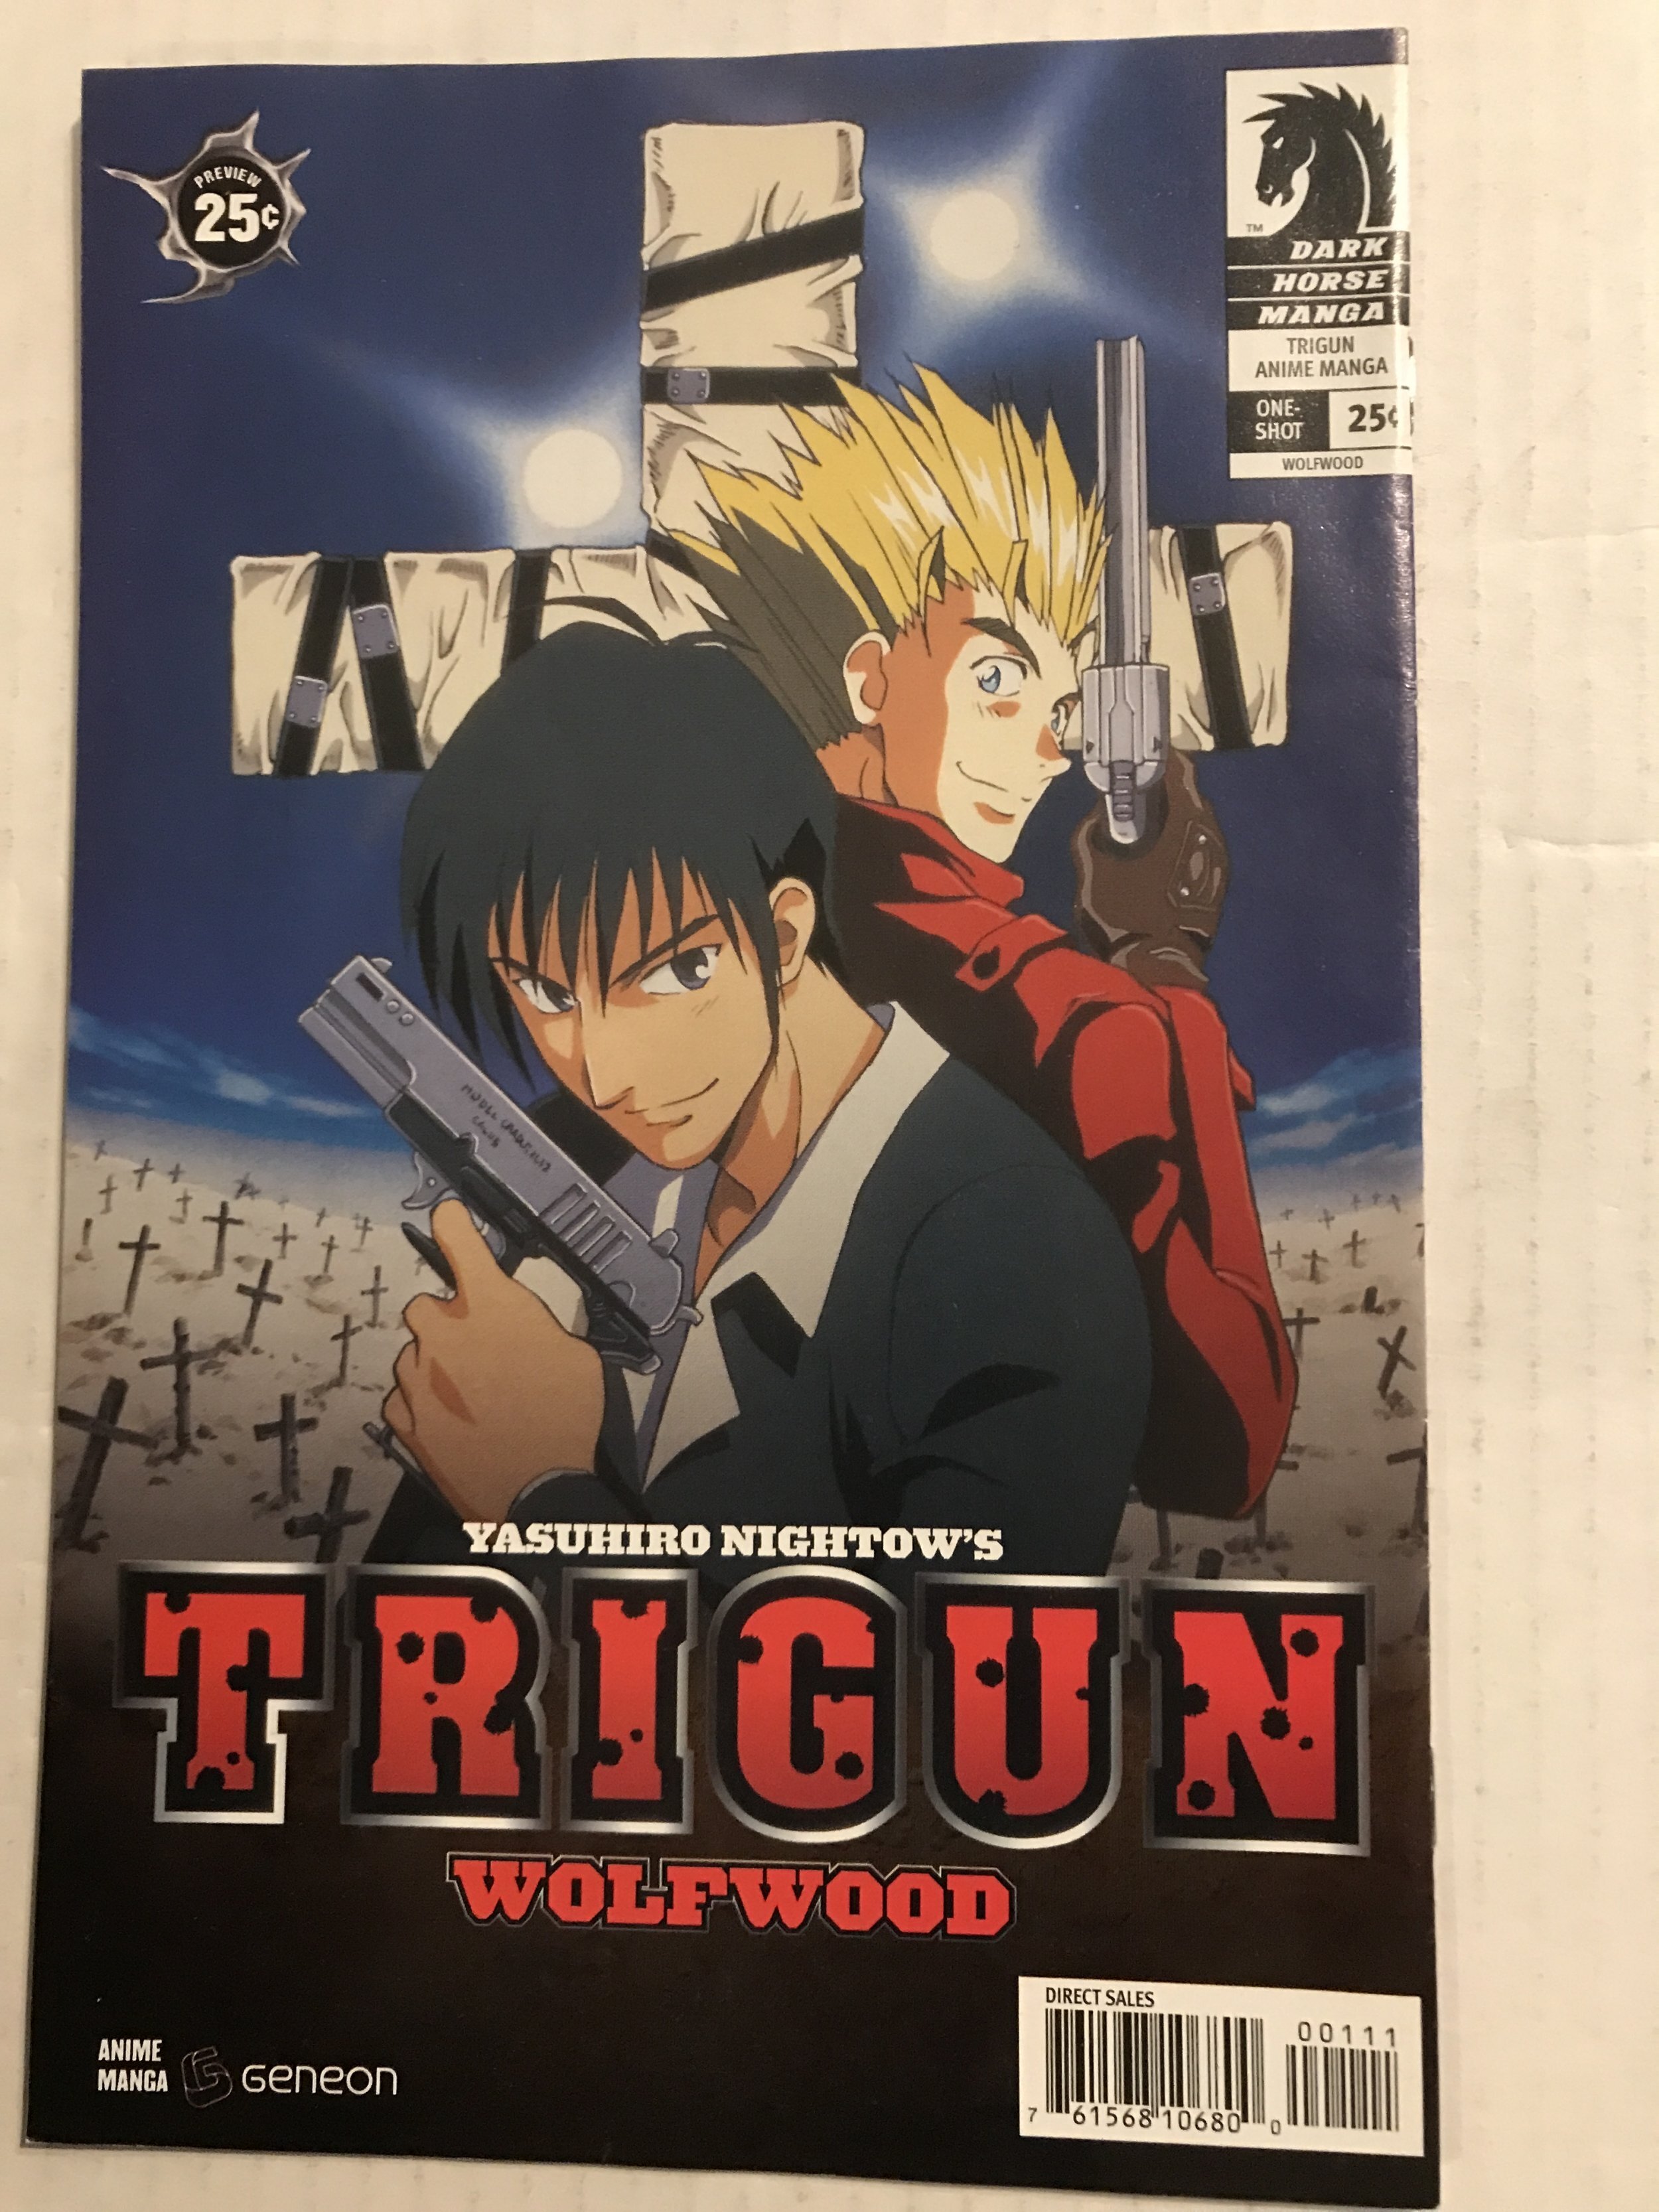 Trigun Stampede Anime: Release Date, Story, Trailer, Producers | NoypiGeeks